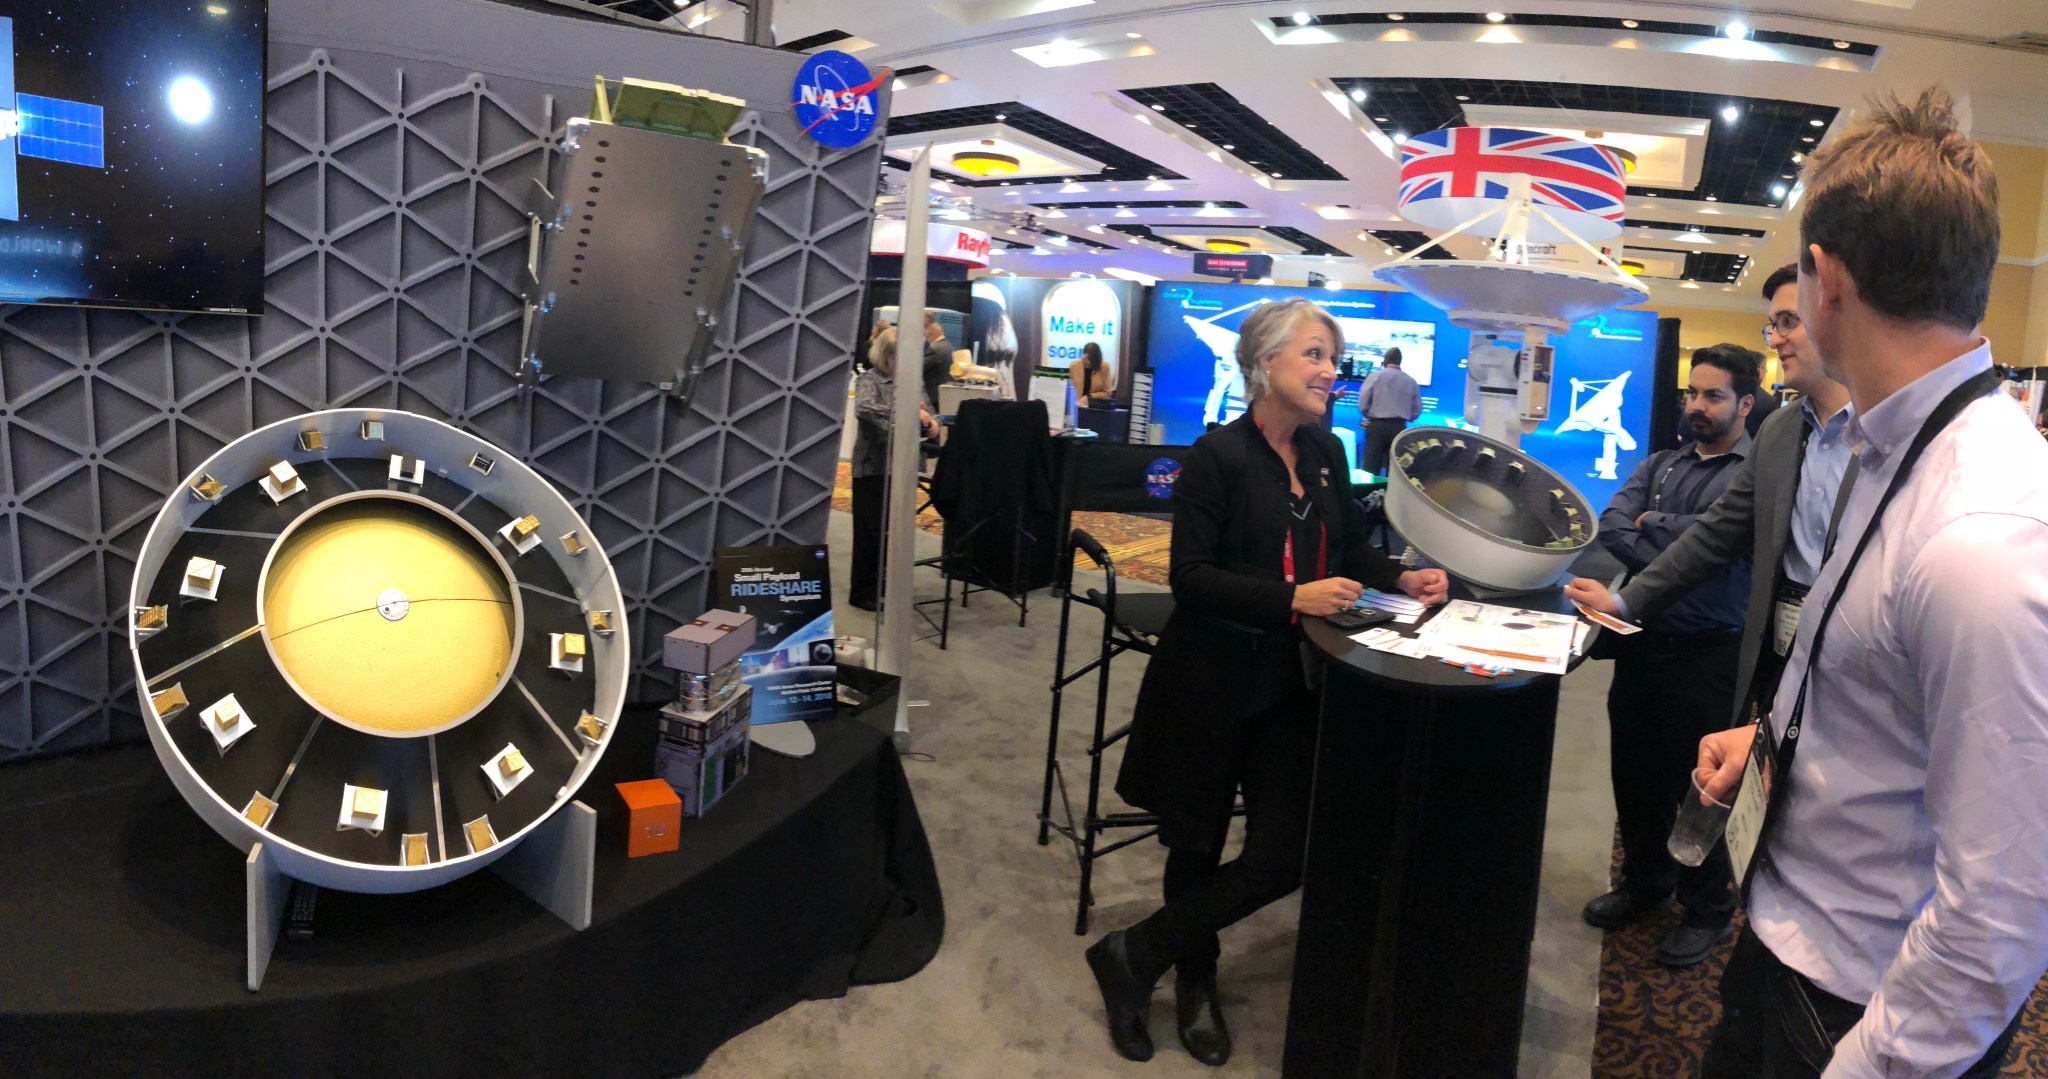 Marcia Lindstrom talks to guests about the Space Launch System and its secondary payloads at the 34th Space Symposium.